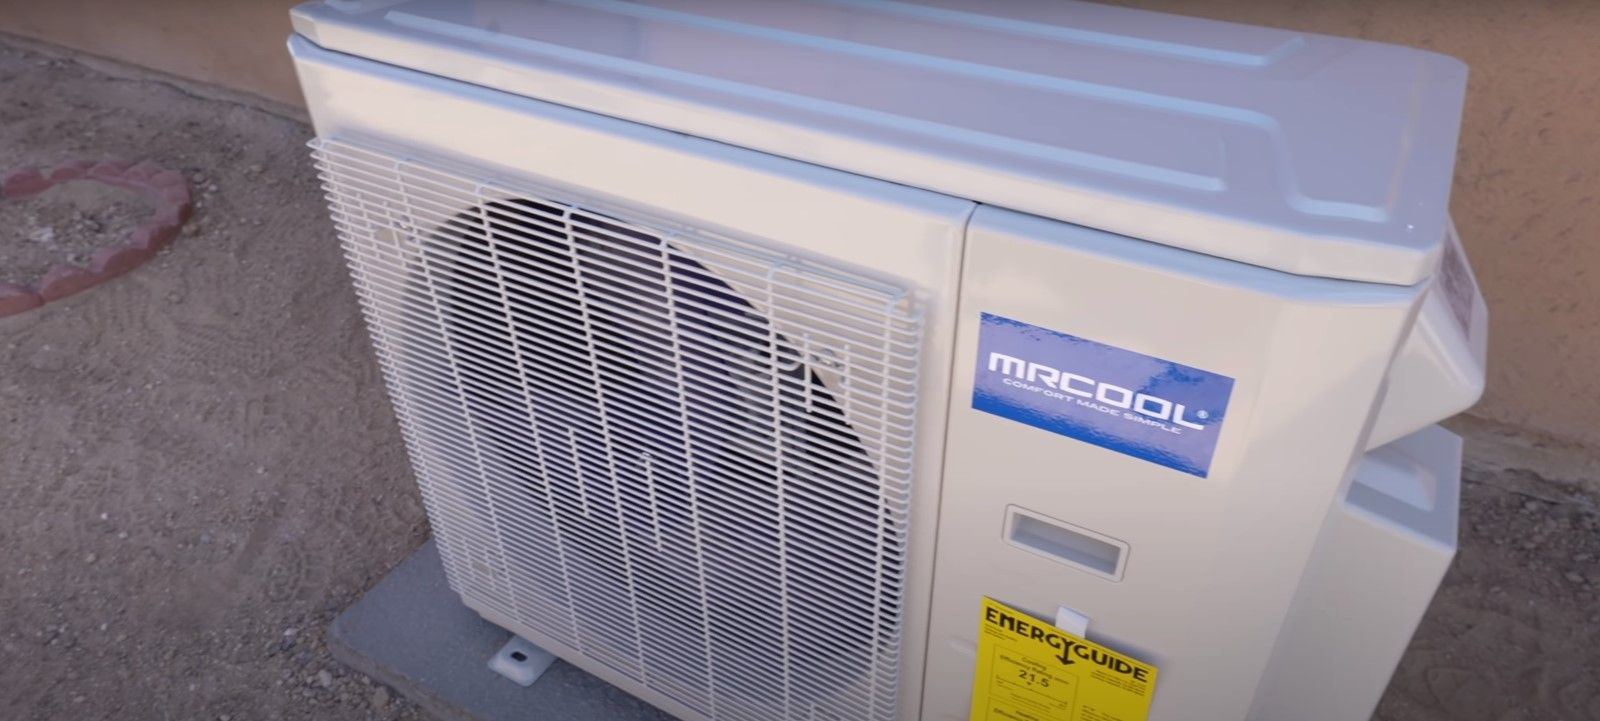 MrCool or Goodman Which HVAC System Should I Purchase